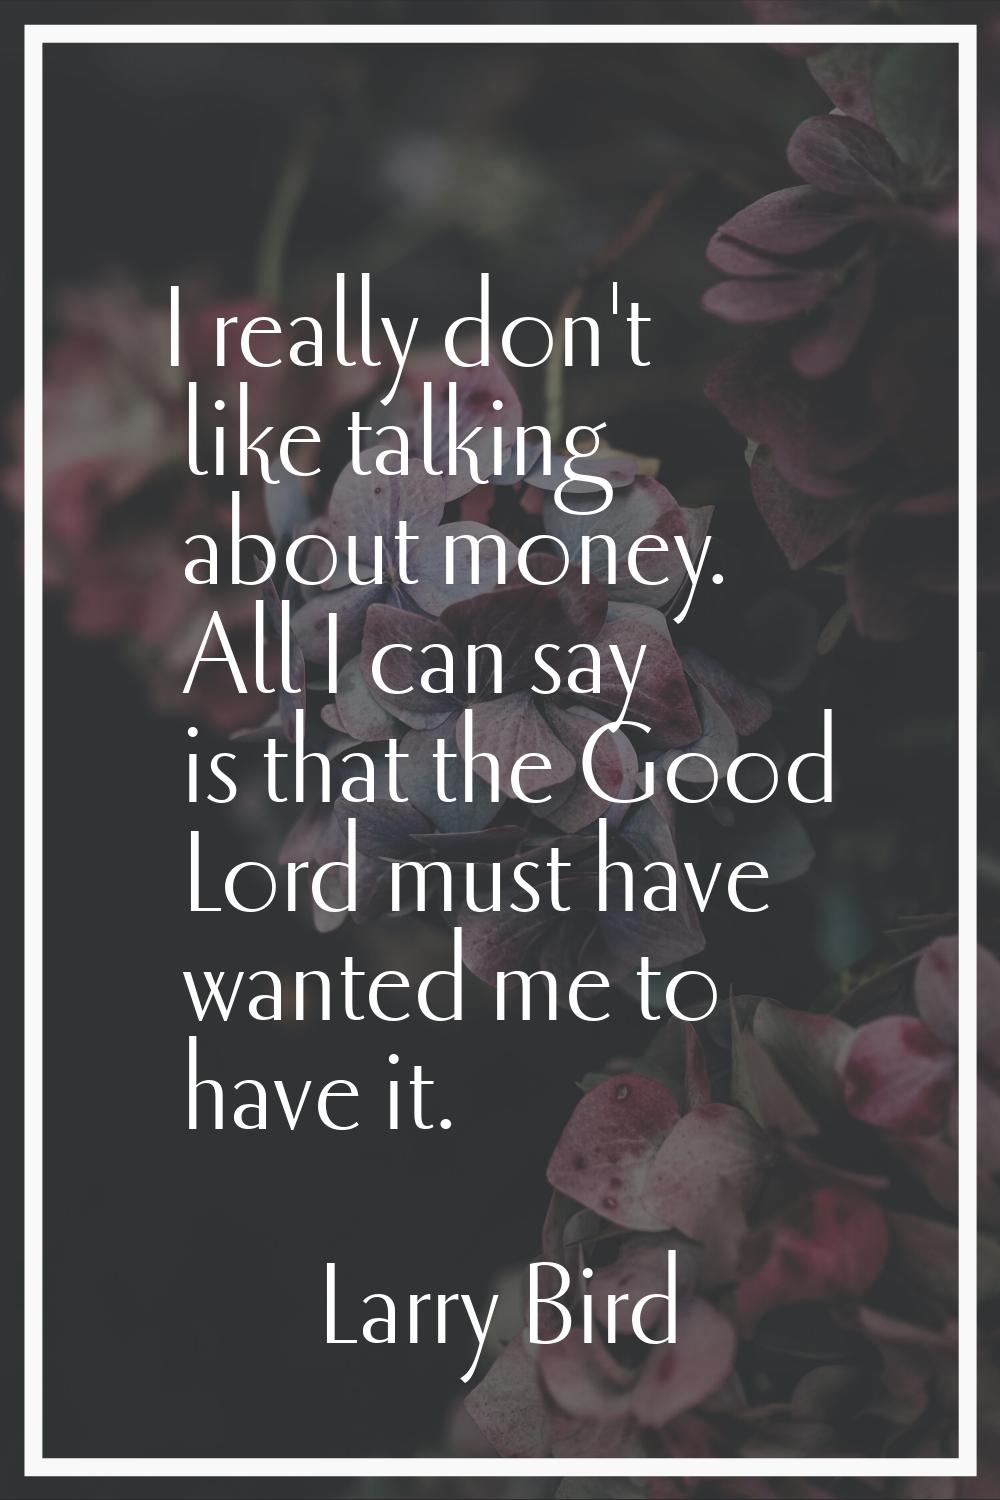 I really don't like talking about money. All I can say is that the Good Lord must have wanted me to